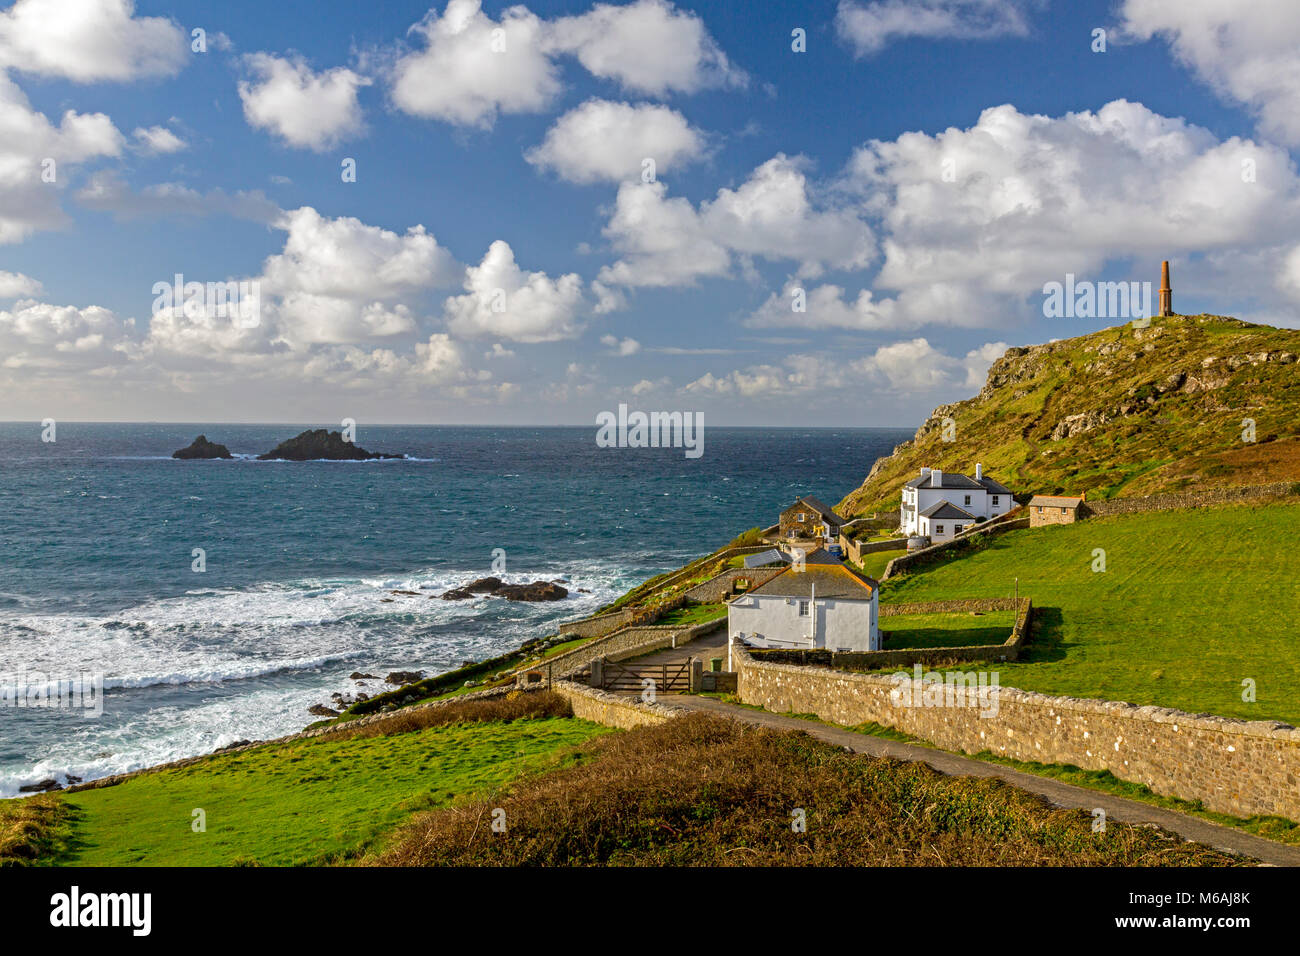 The chimney of a former tin mine now acts as a daymark for navigation around the coastline at Cape Cornwall and The Brisons rocks, England, UK Stock Photo